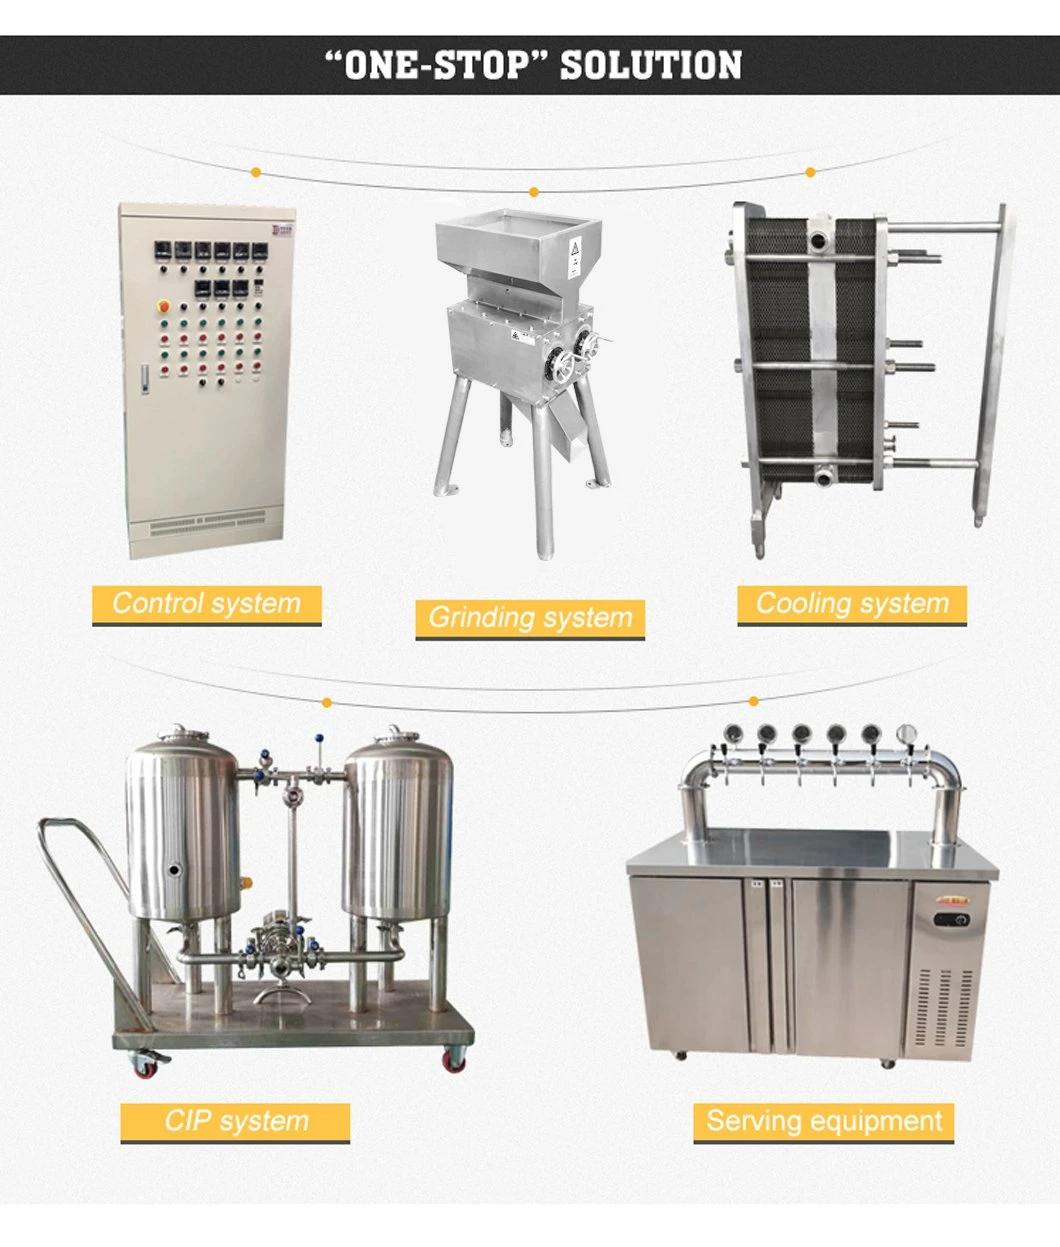 1500L 2000L 15bbl 20bbl Beer Brewery Equipment with Touch Screen Control